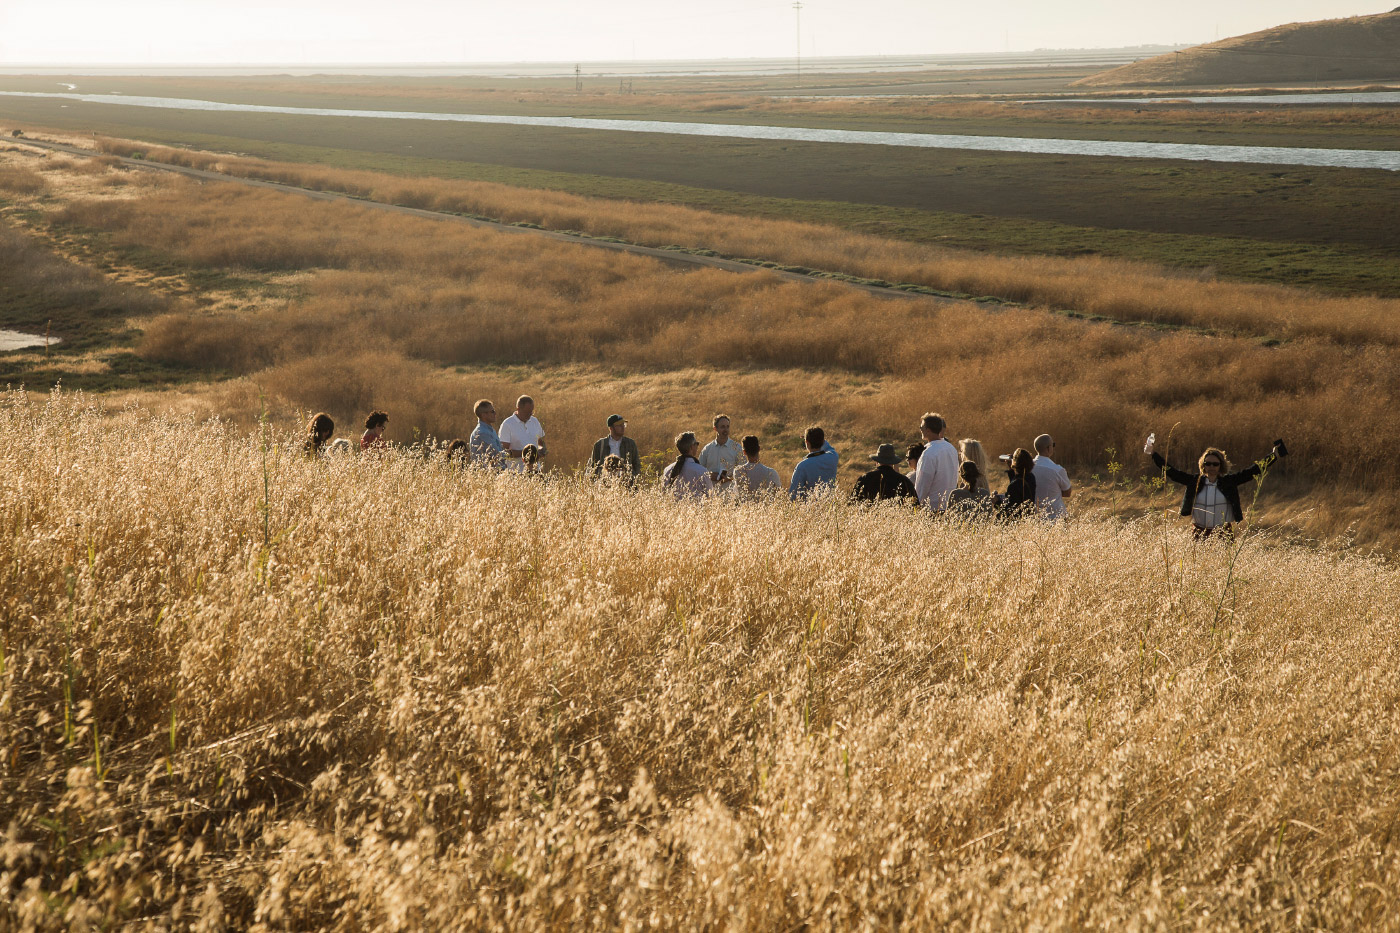 Meeting attendees overlooking Alameda Creek near Fremont, California. Council members’ time away from everyday responsibilities allows for collaboration and reflection on larger challenges.